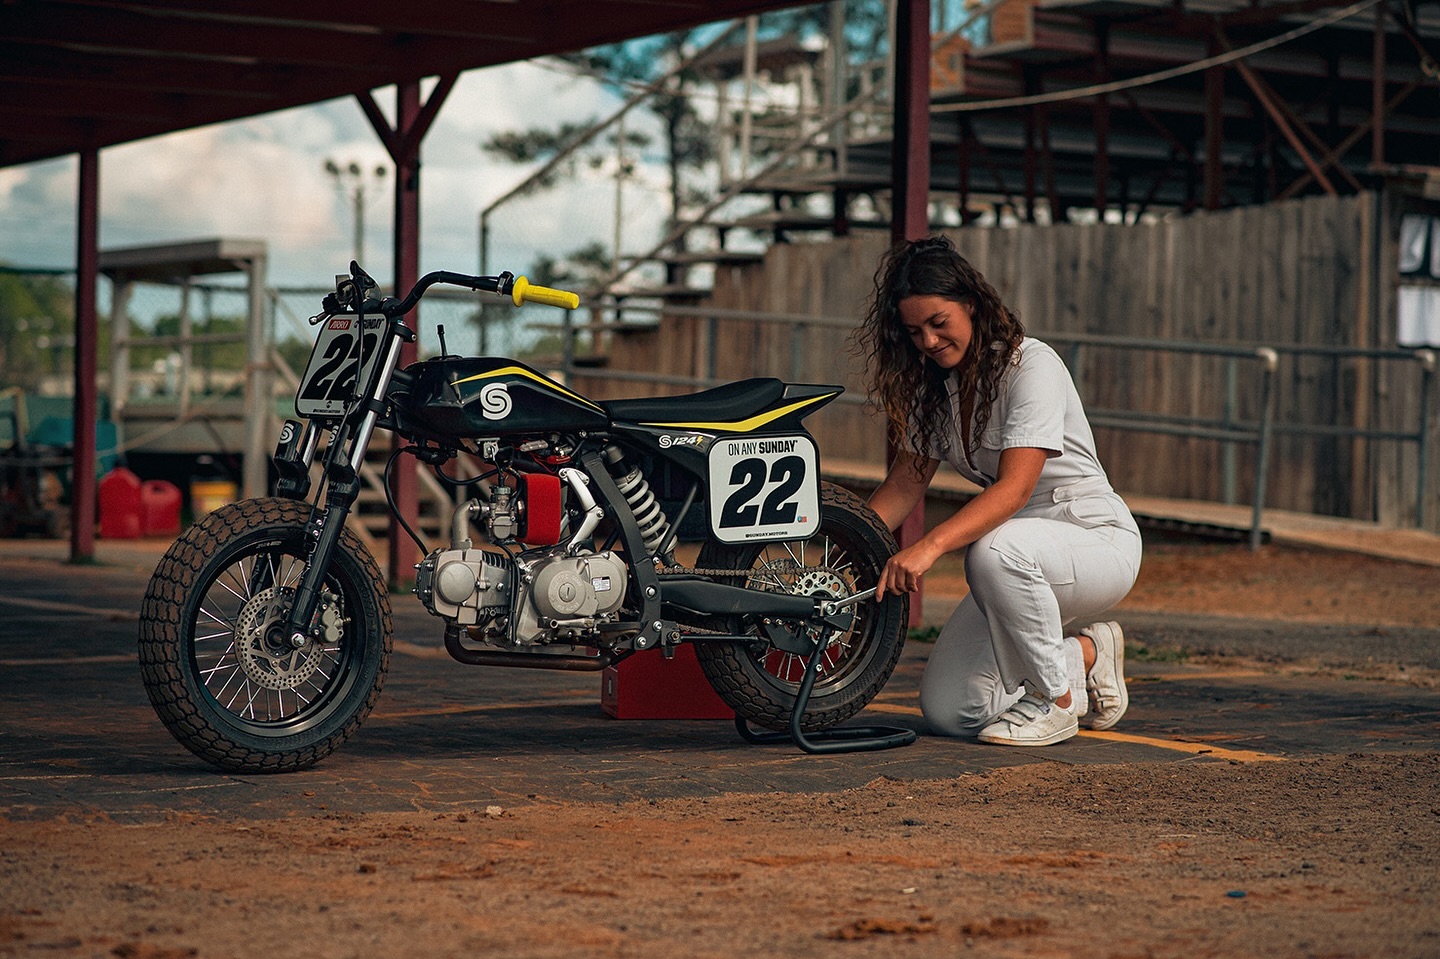 Just a check... Everything’s OK to go riding 🤩
—
#sundaymotors #flattrack #moto #motorcycle